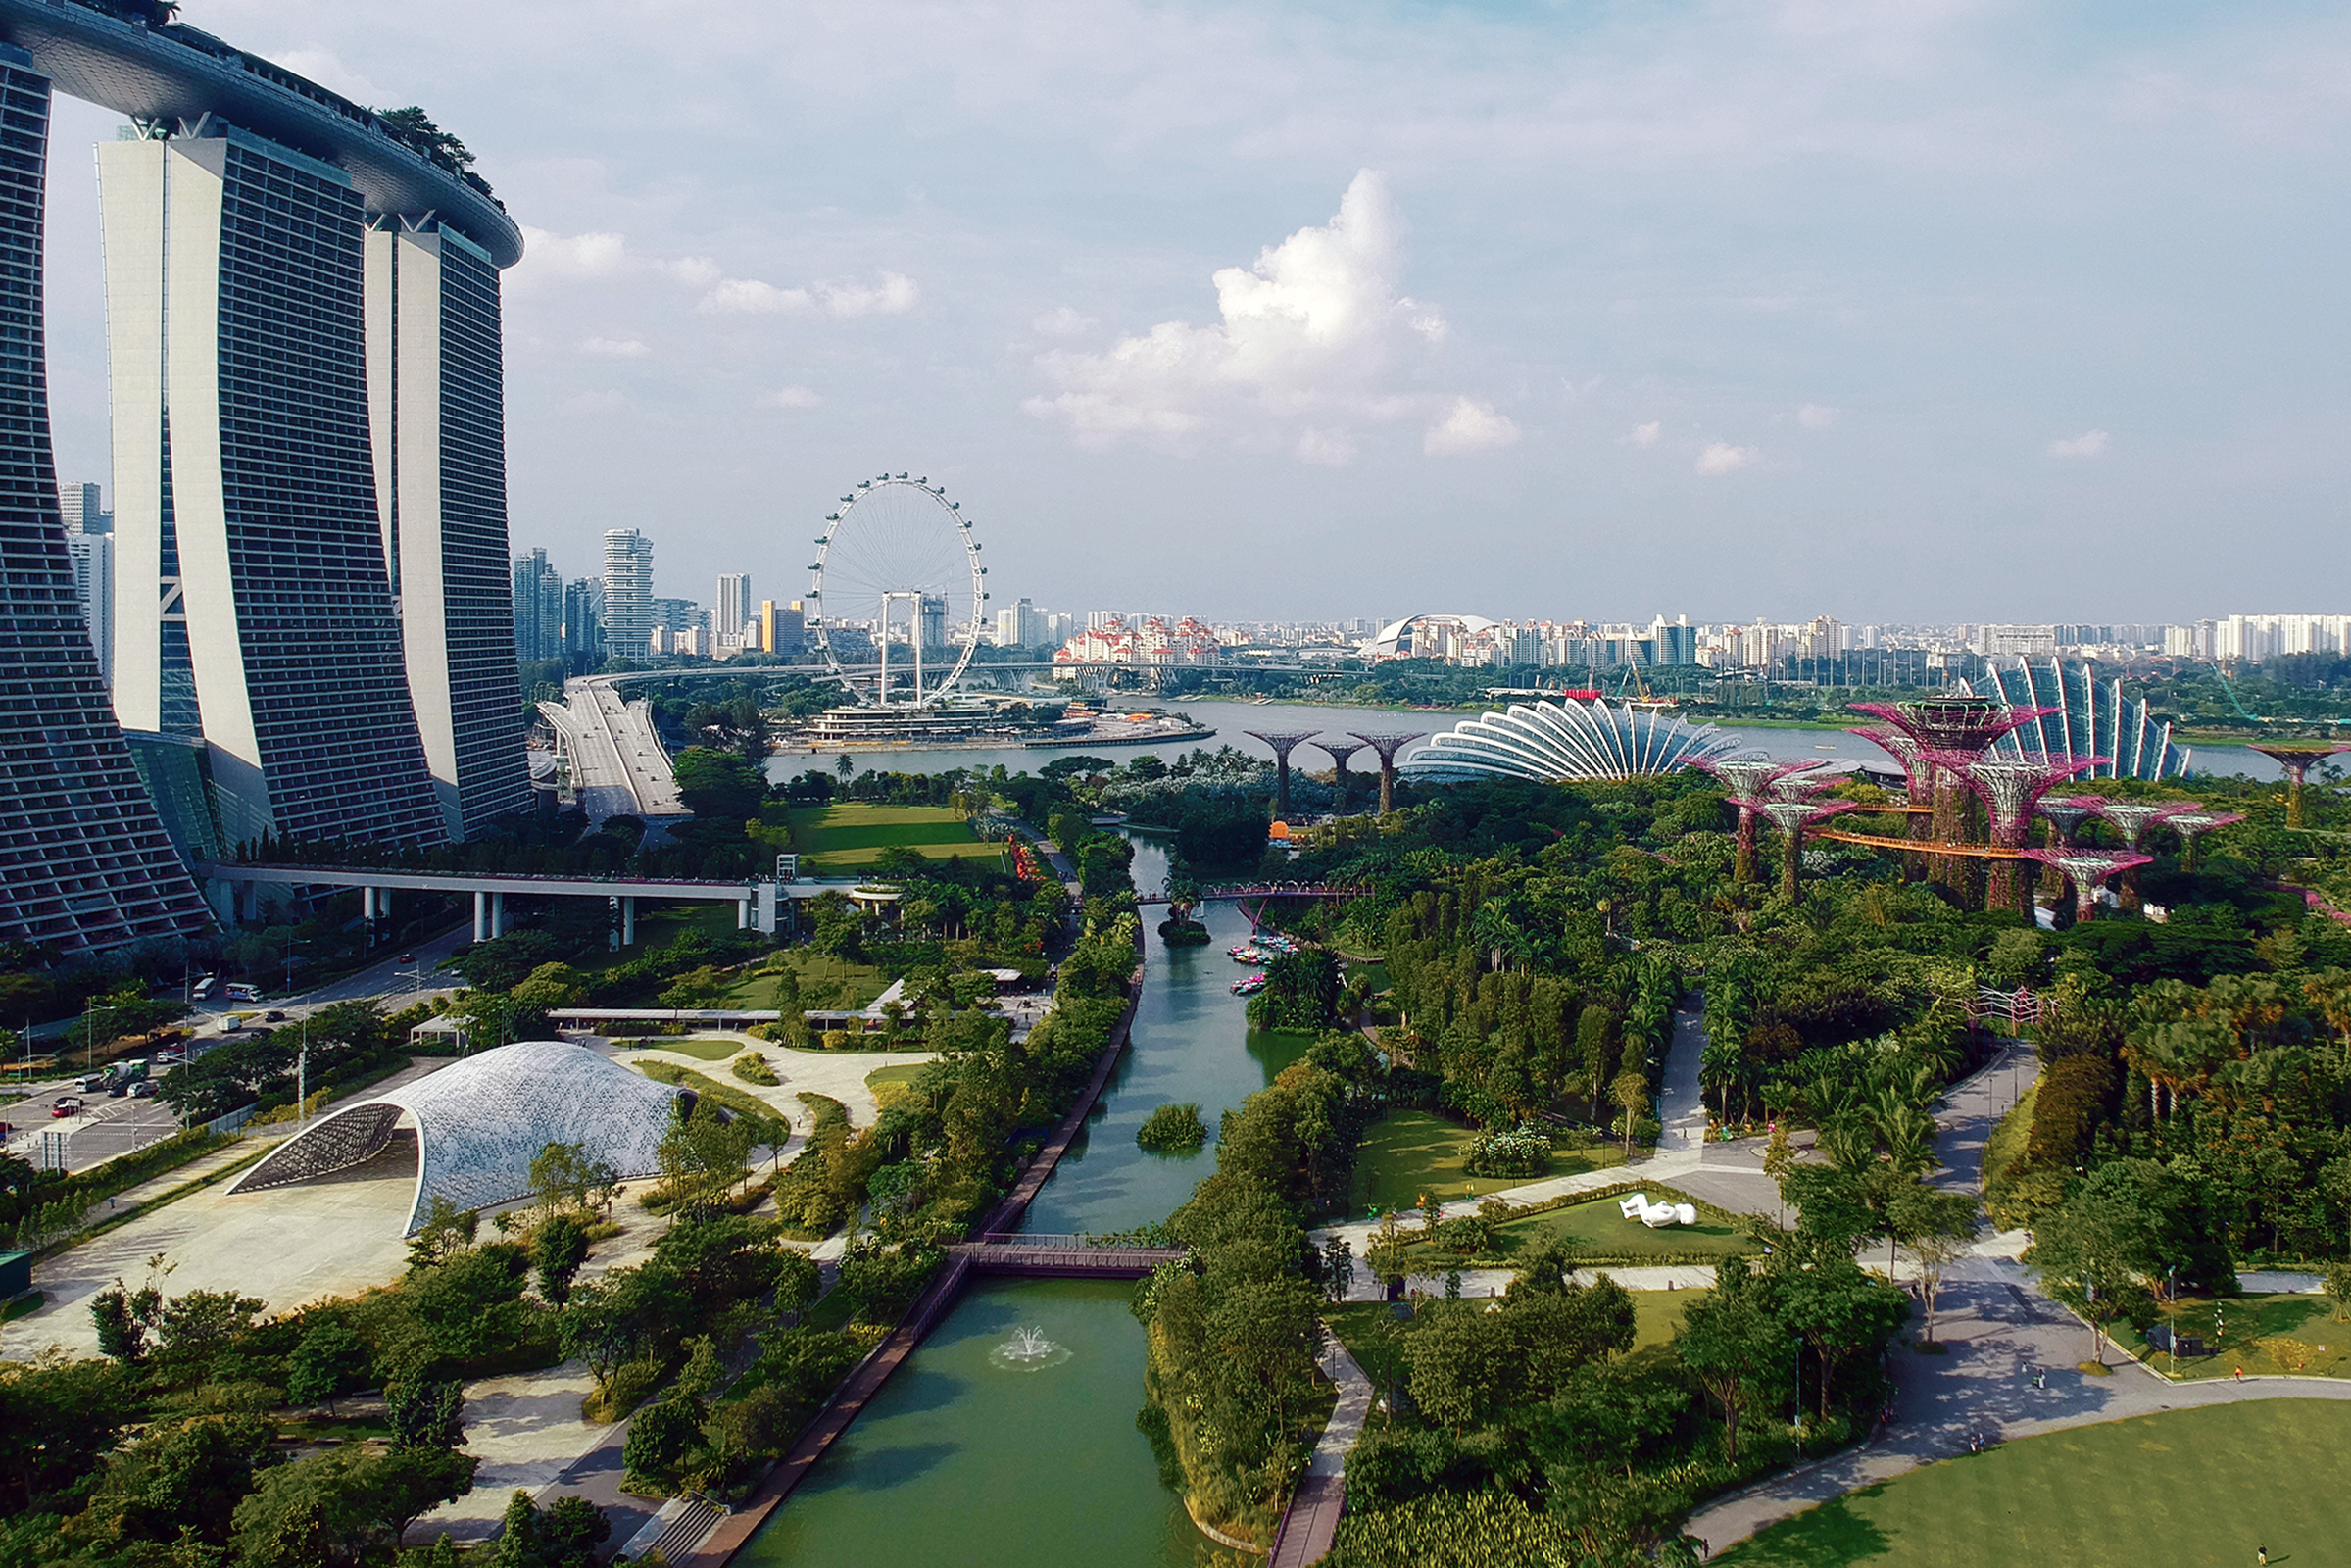 <p>The Future of Us Pavilion as a permanent Singapore landmark in the context of the Gardens by the Bay, aerial view from south.</p>